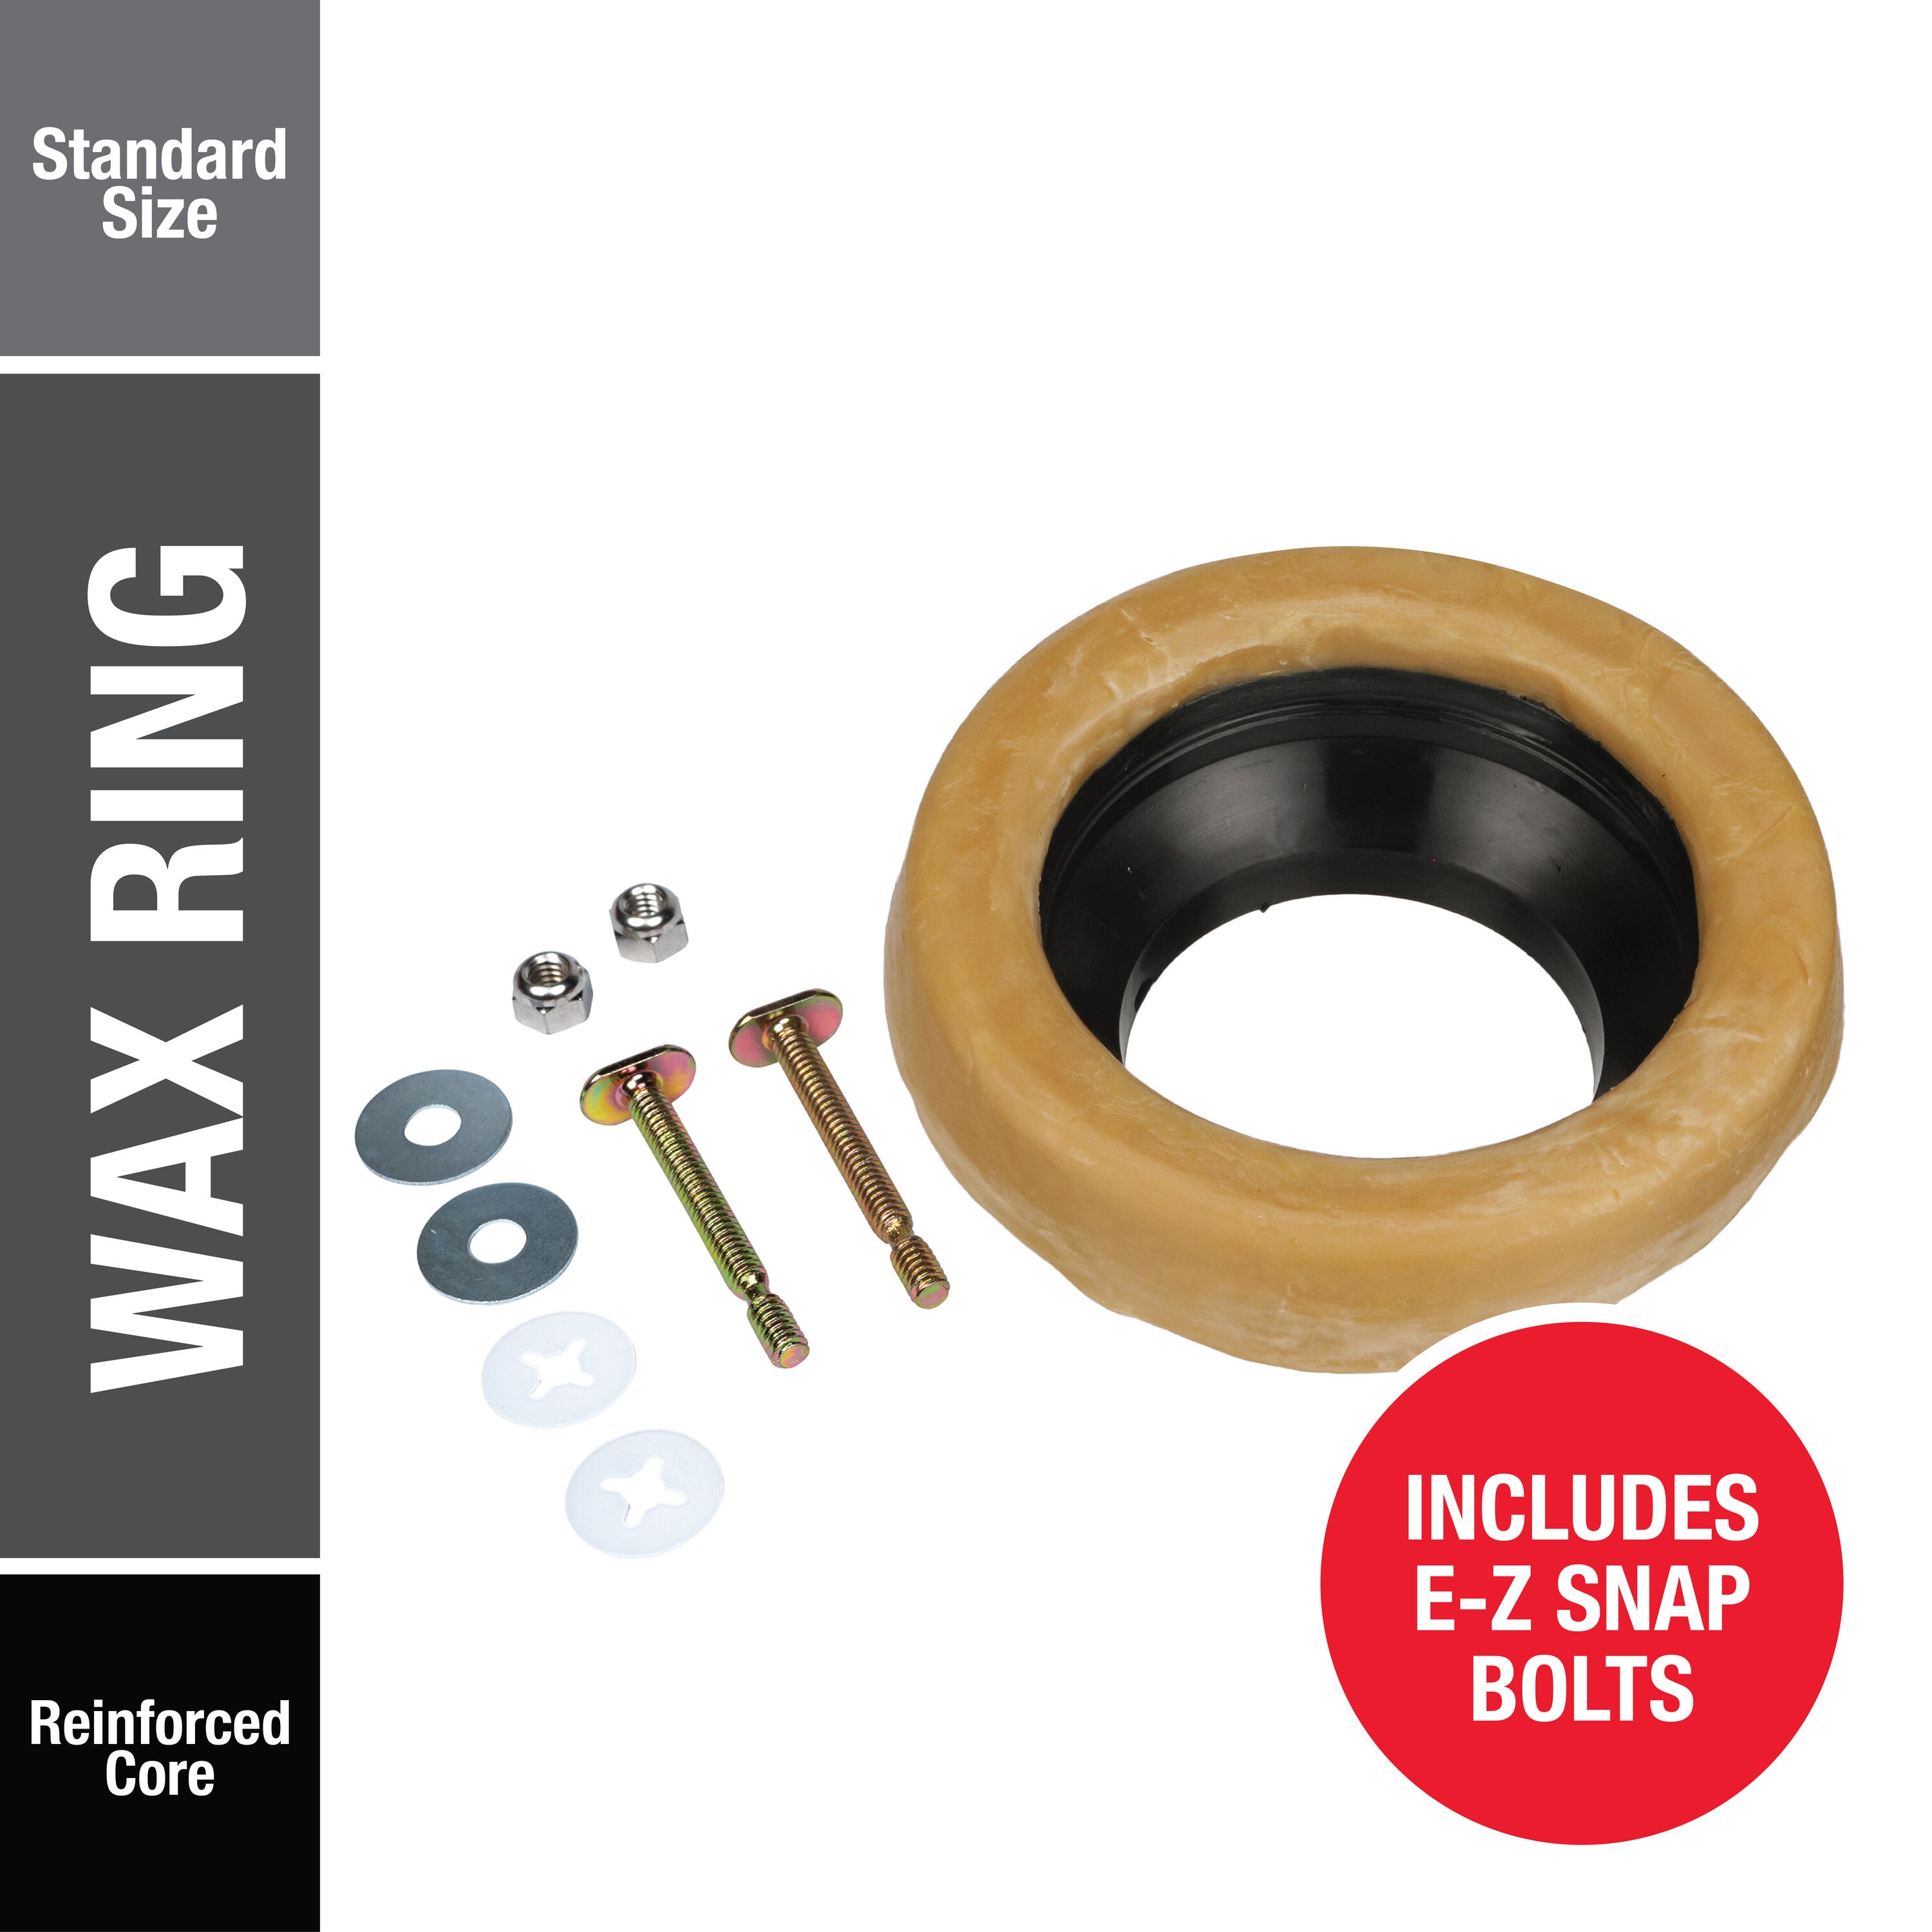 F Extra Thick Toilet Wax Ring Kit with Flange and Bolts for Floor Outlet Toilets New Install or Re-seat, Fits 3-Inch or 4-Inch Waste Lines